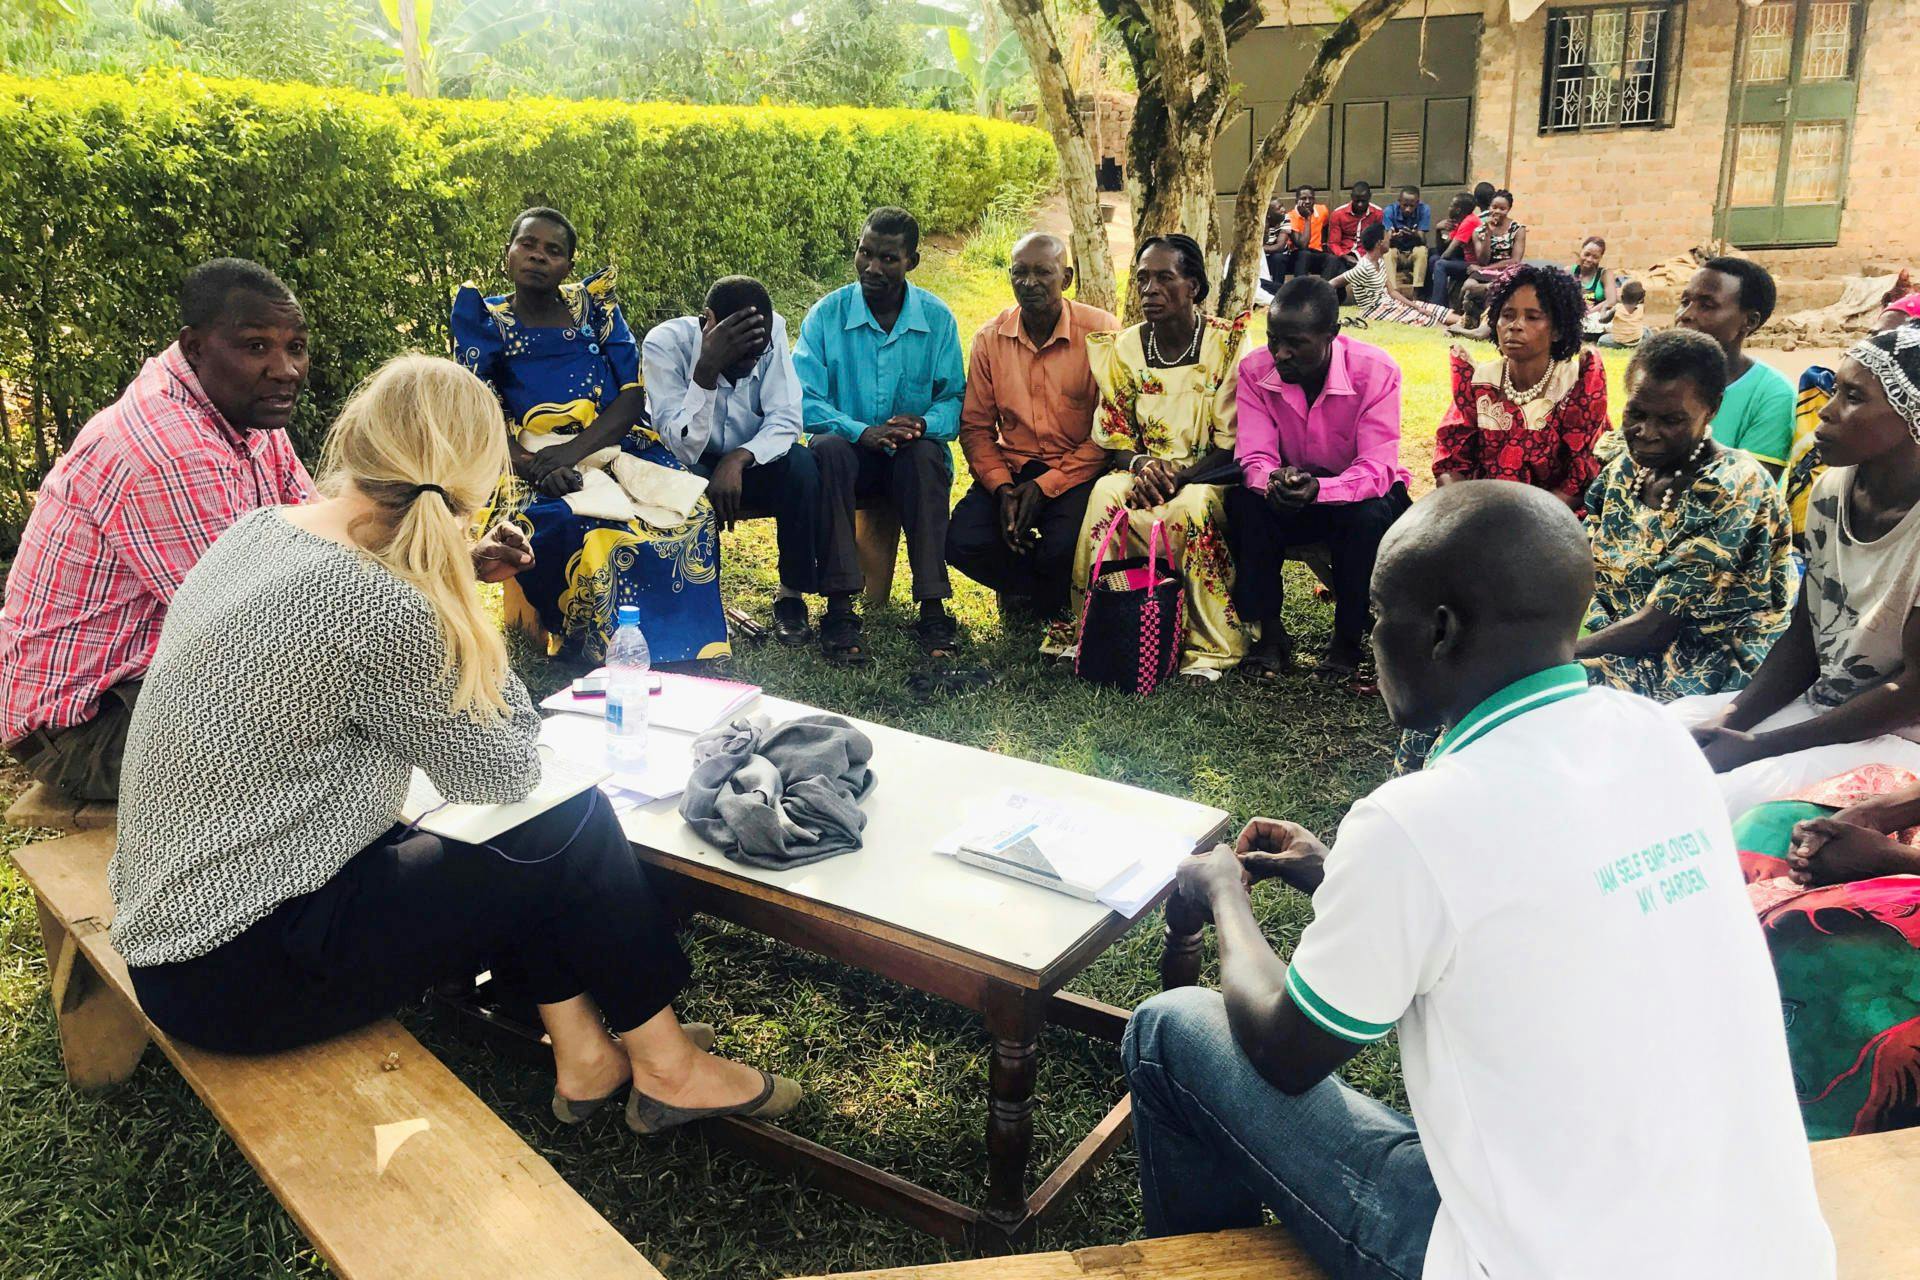 A group discussion with parents and community elders in one of the villages